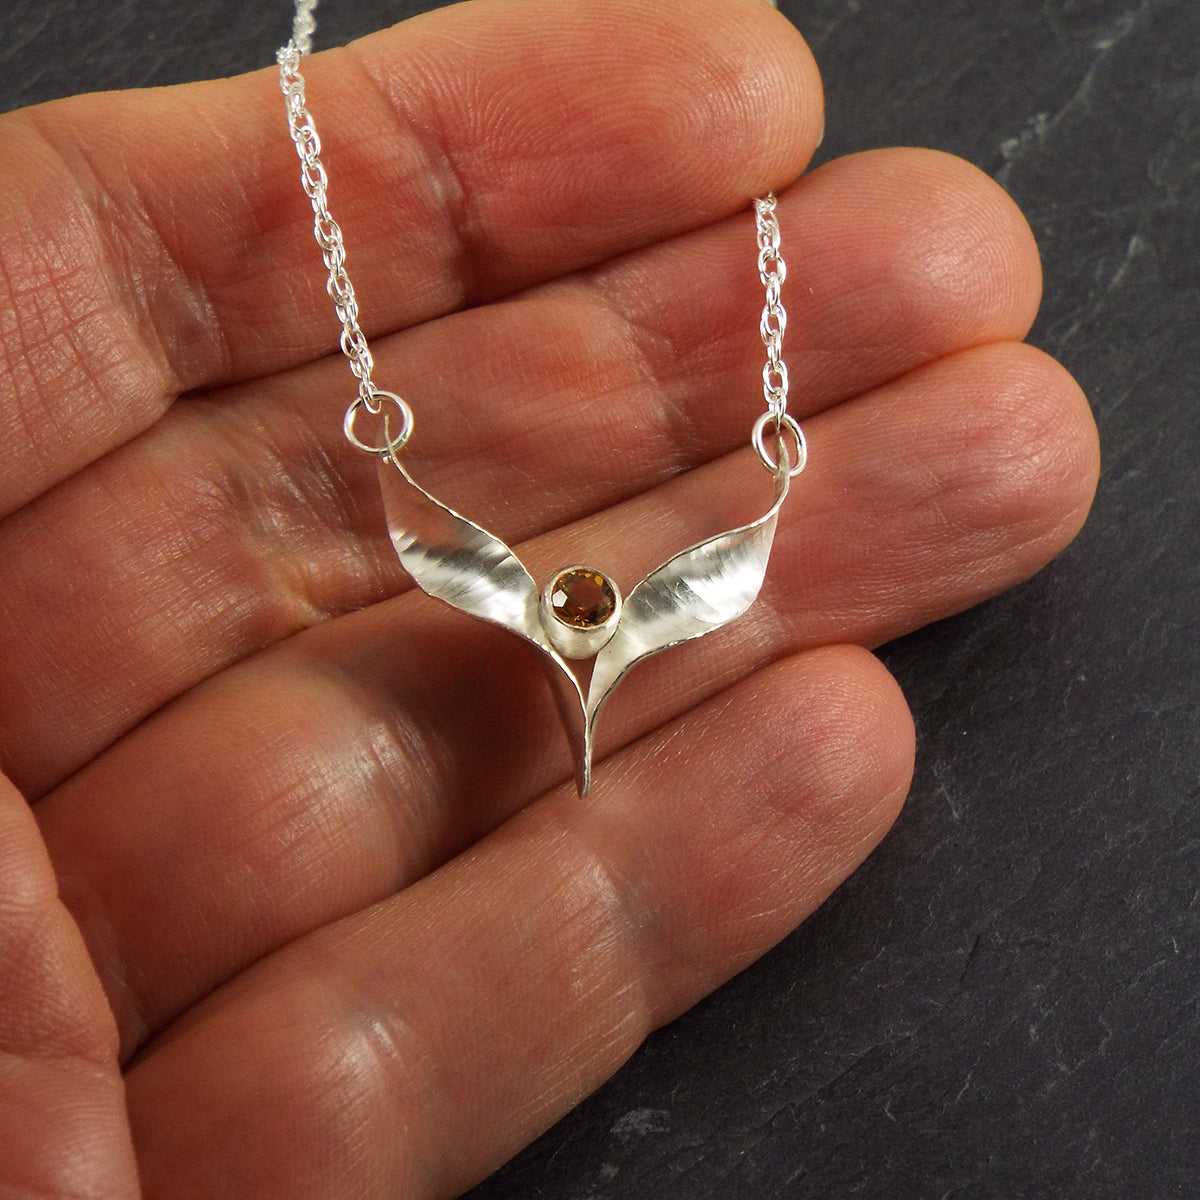 A silver bird necklace made from two mirror-image twisted and curled units soldered at the lower point and attached to a silver rope chain by a silver jump ring at each outer point. This one is set with a yellow citrine. It is shown held in the hand to give an idea of the scale.